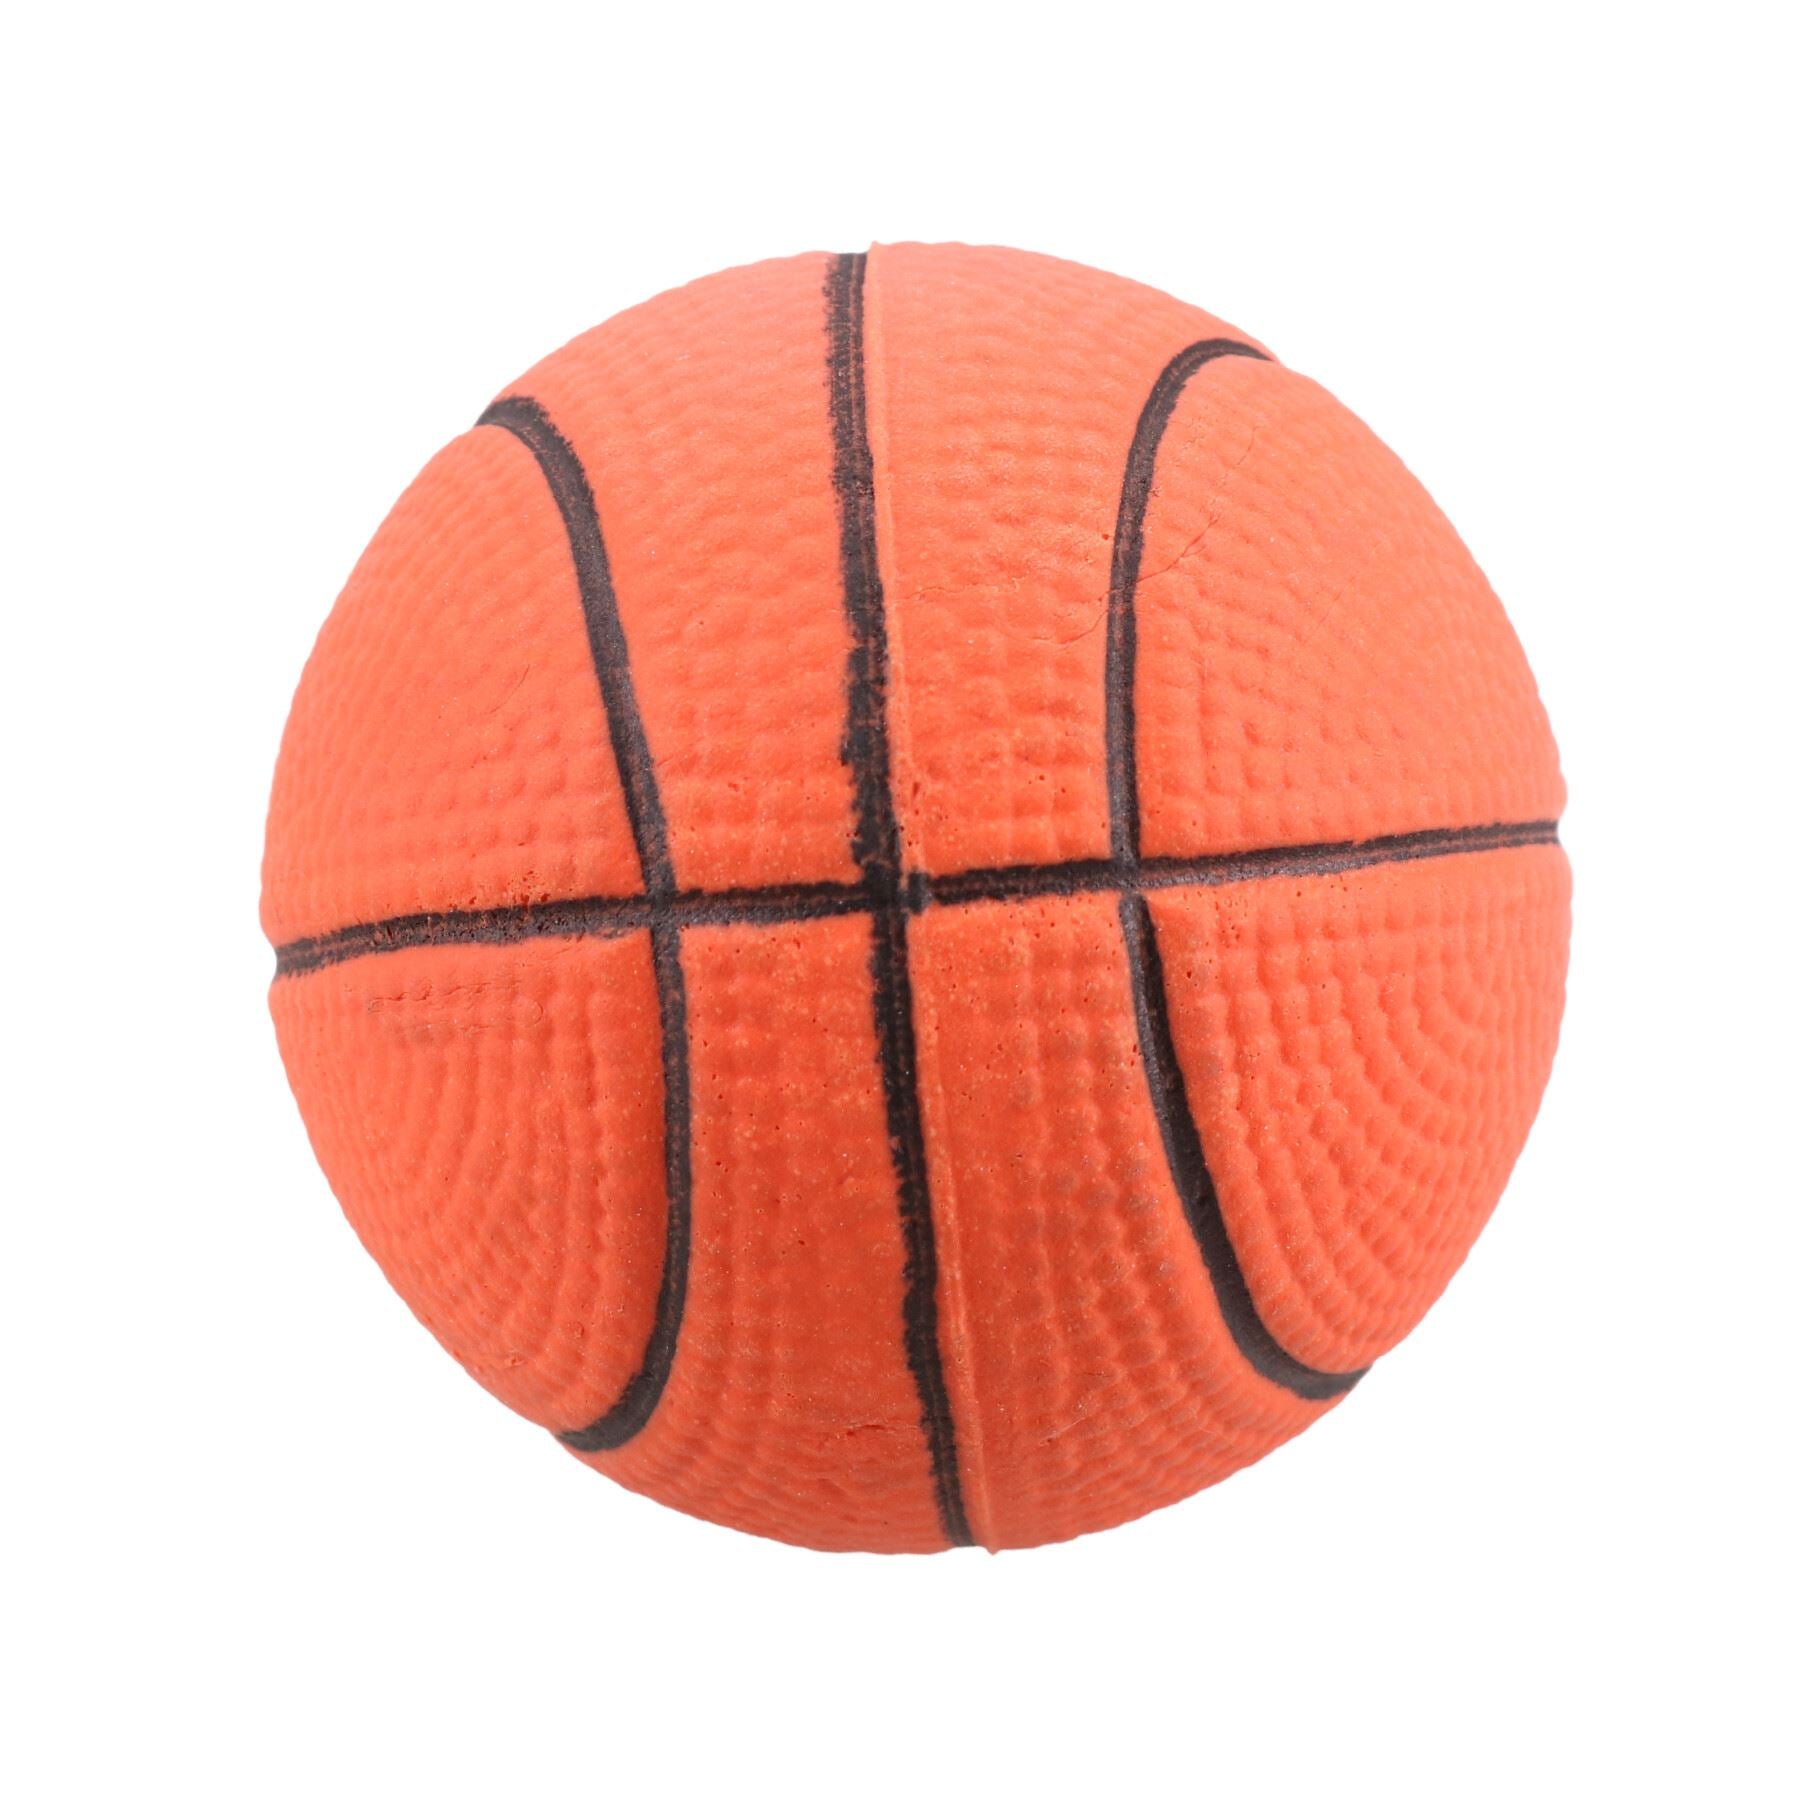 Dog Play Time Rubber Bouncy Small Basketball Sports Ball 6cm 1PK